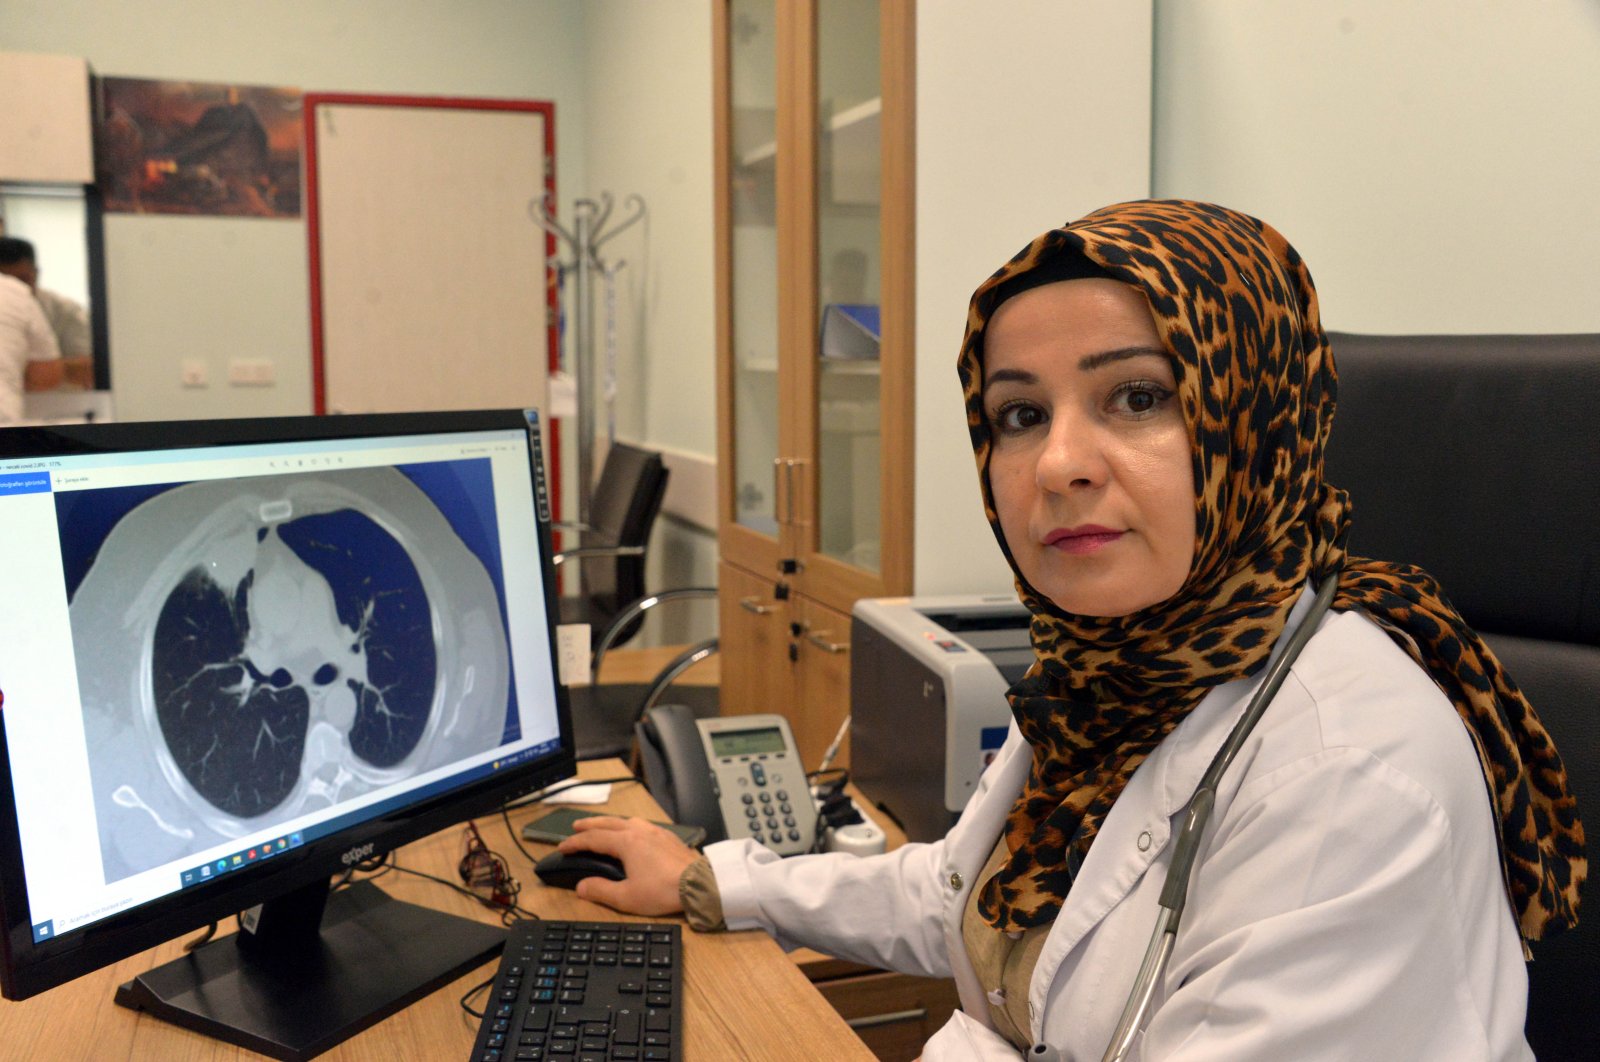 Dr. Fatoş Kozanlı shows the imaging of a patient's lungs on a computer screen, in Kahramanmaraş, Turkey, Sept. 12, 2021. (DHA PHOTO)